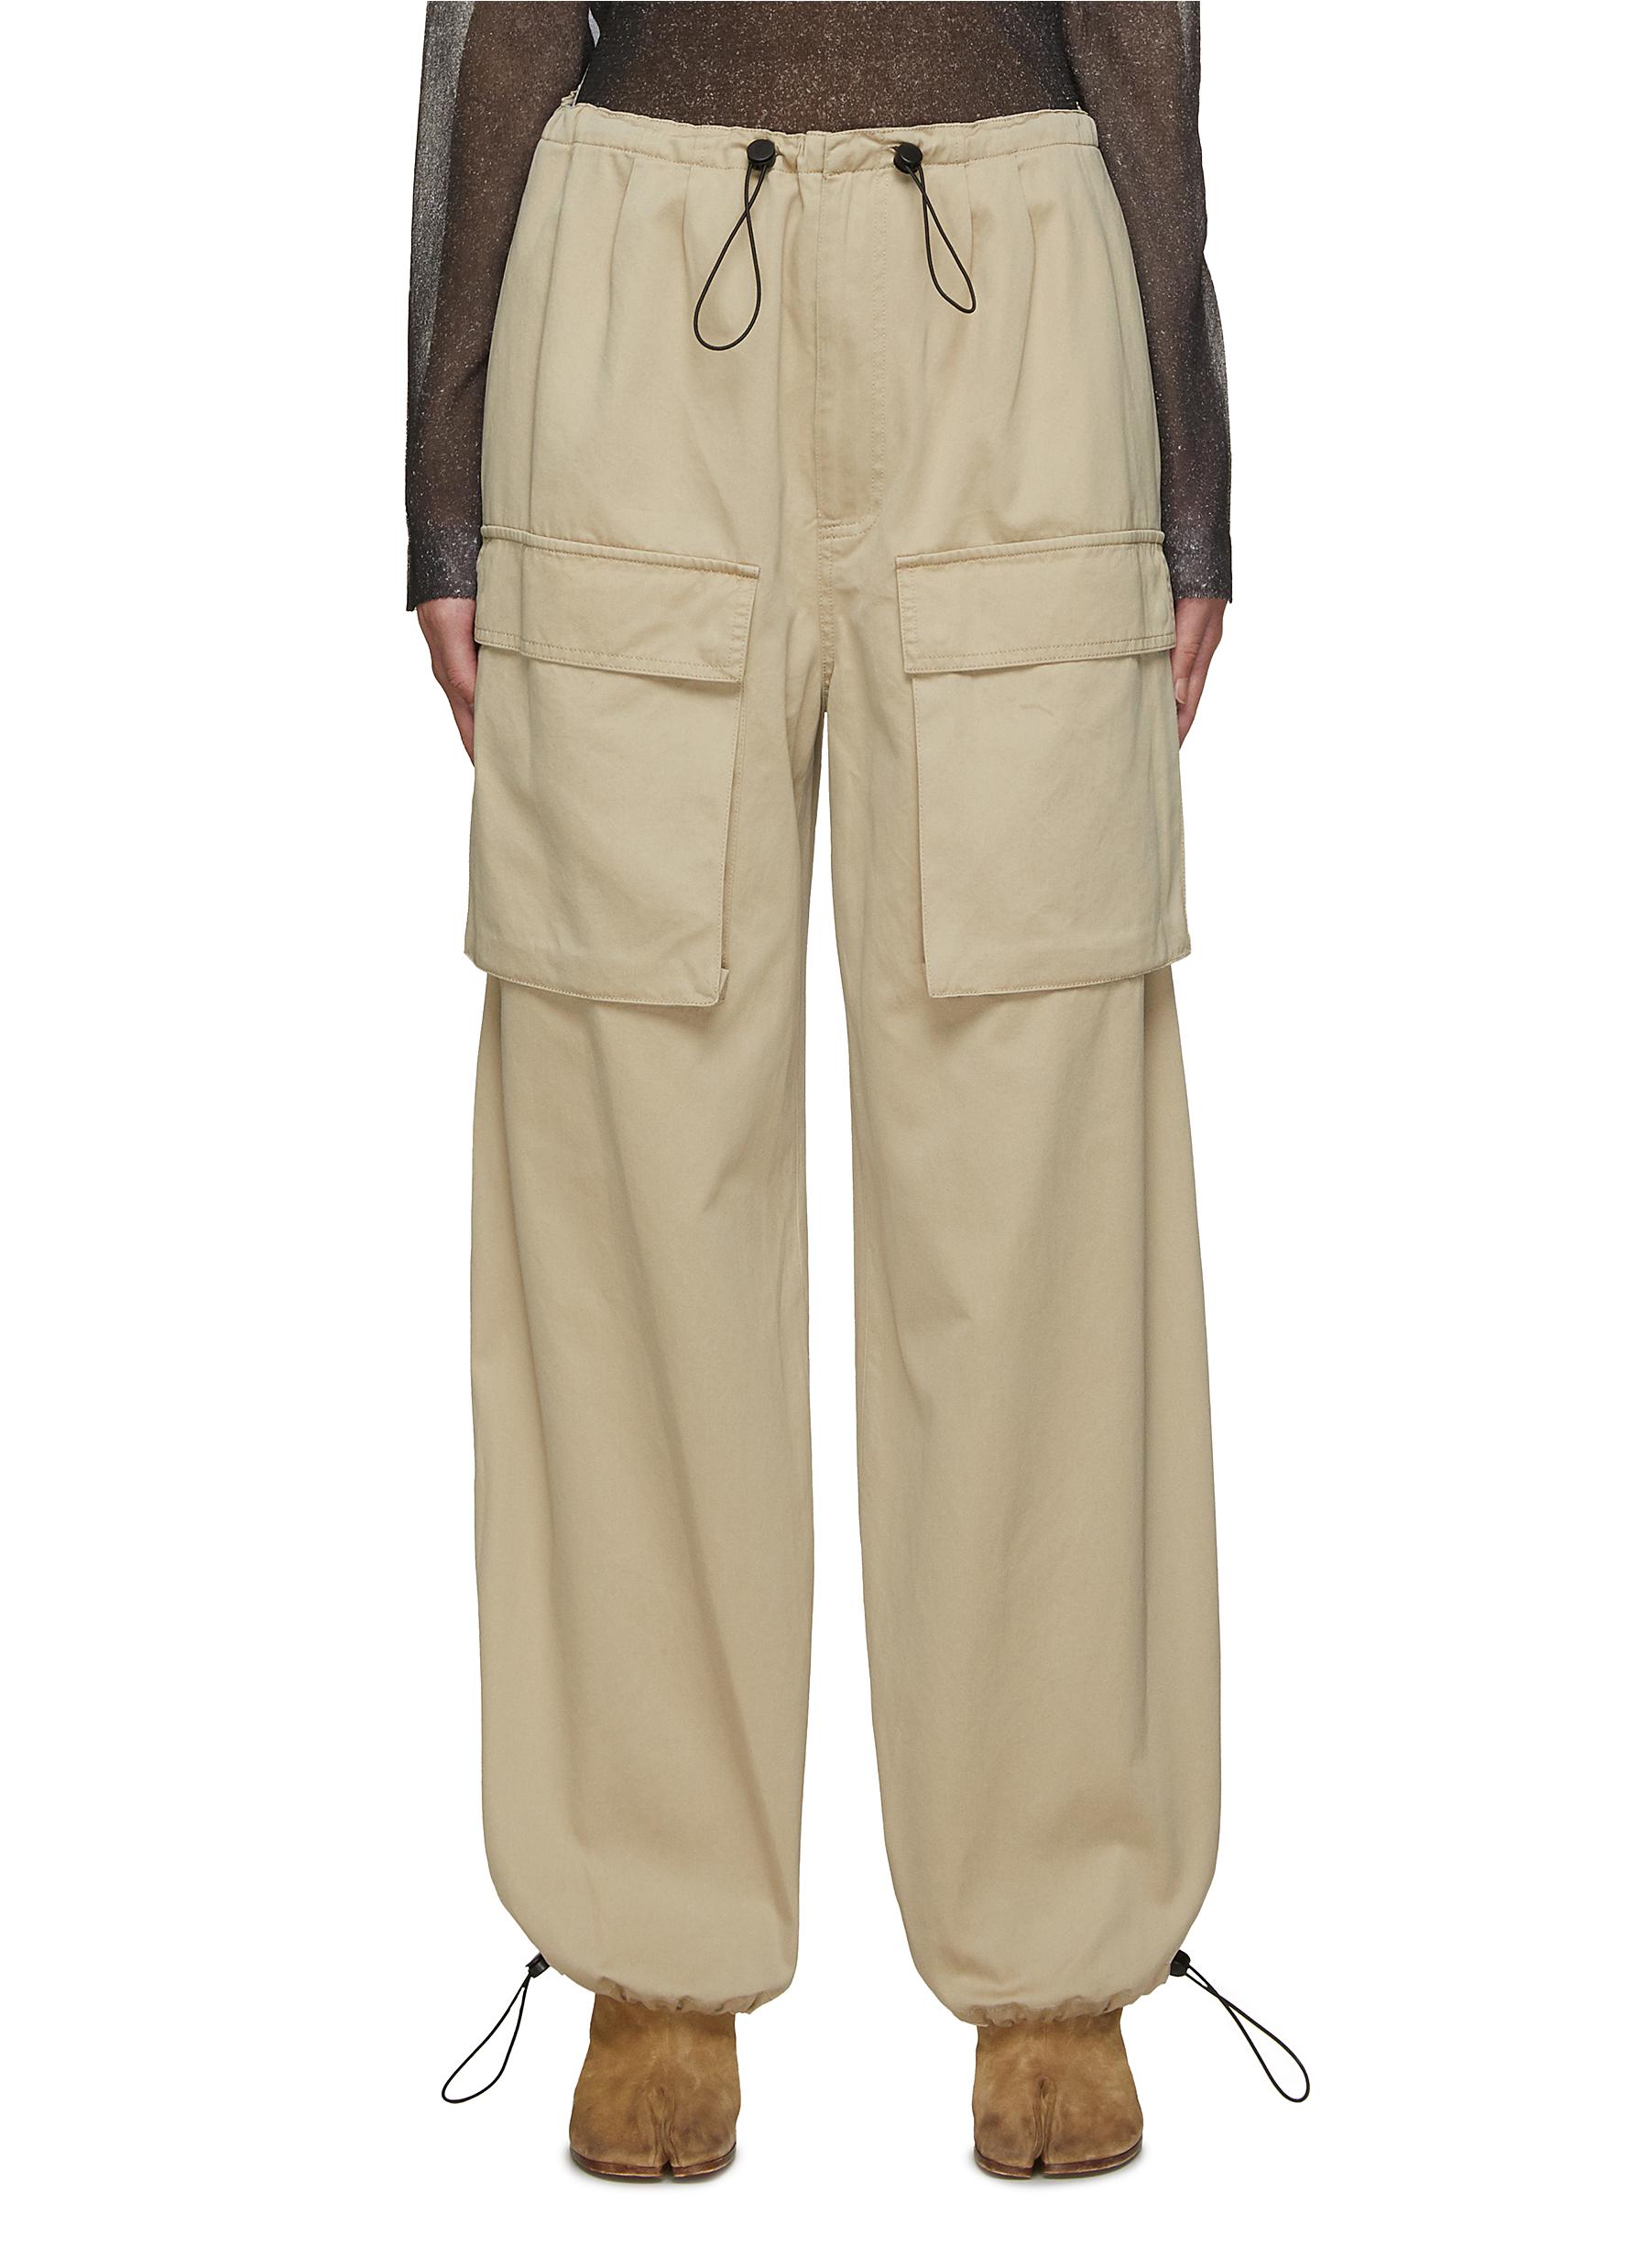 Relaxed Fit Nylon Cargo Pants - Light sage green - Men